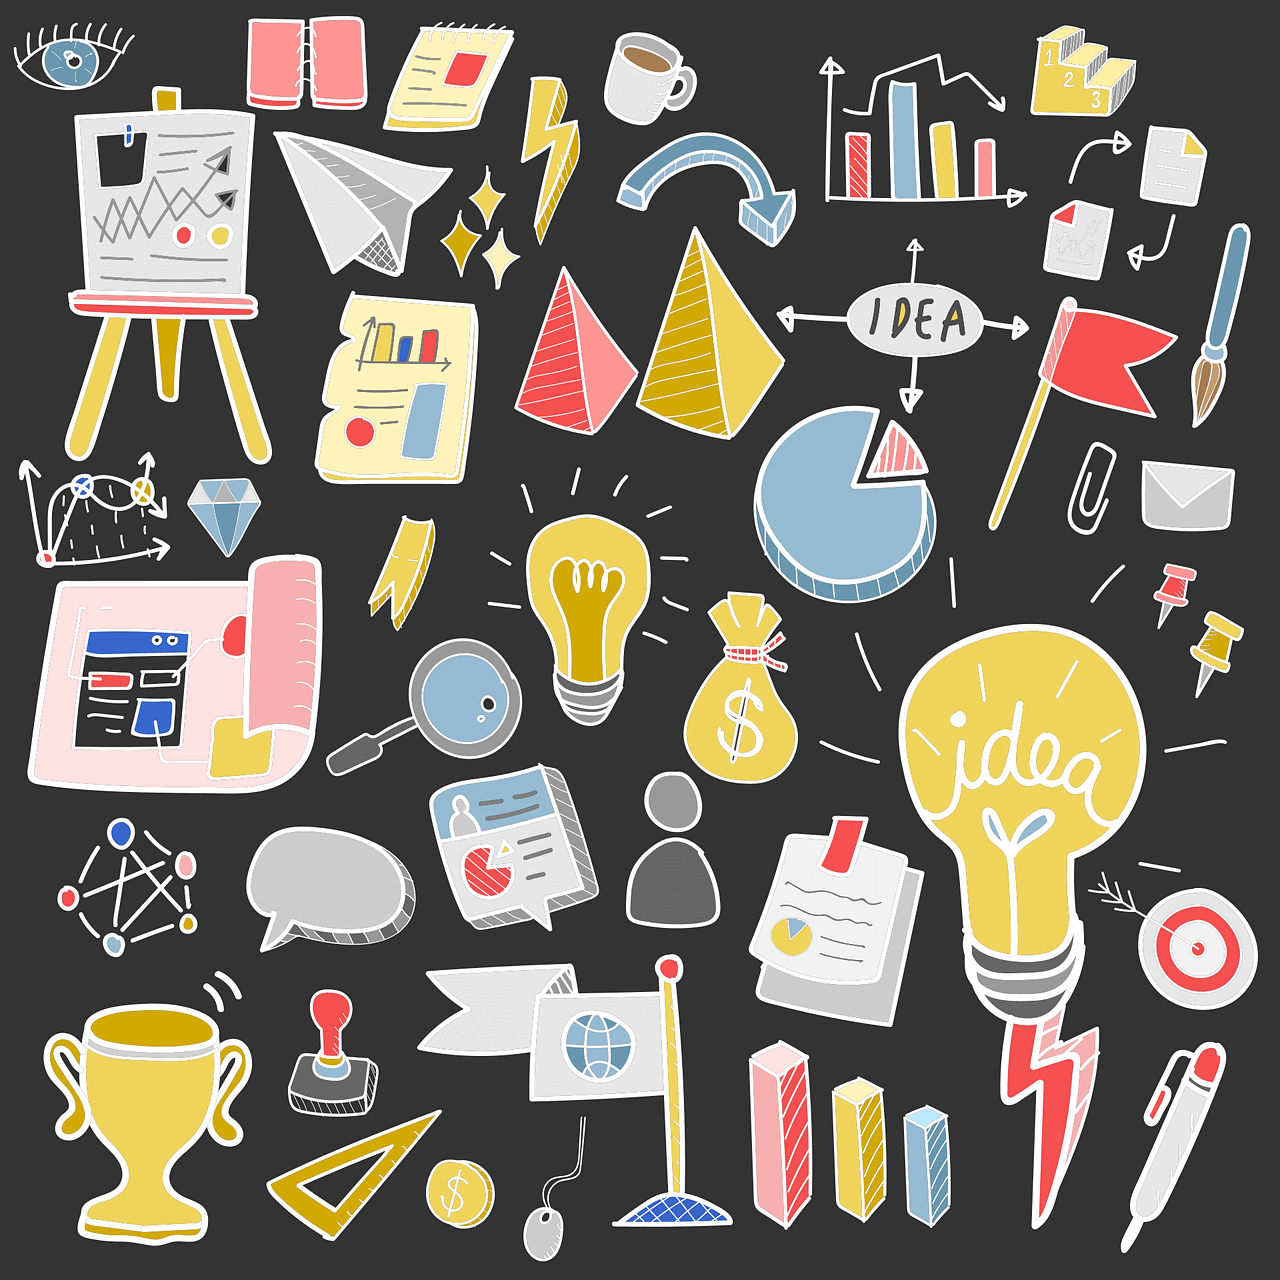 Illustrations of several tools and resources for Content marketing along with a symbolic representation of results